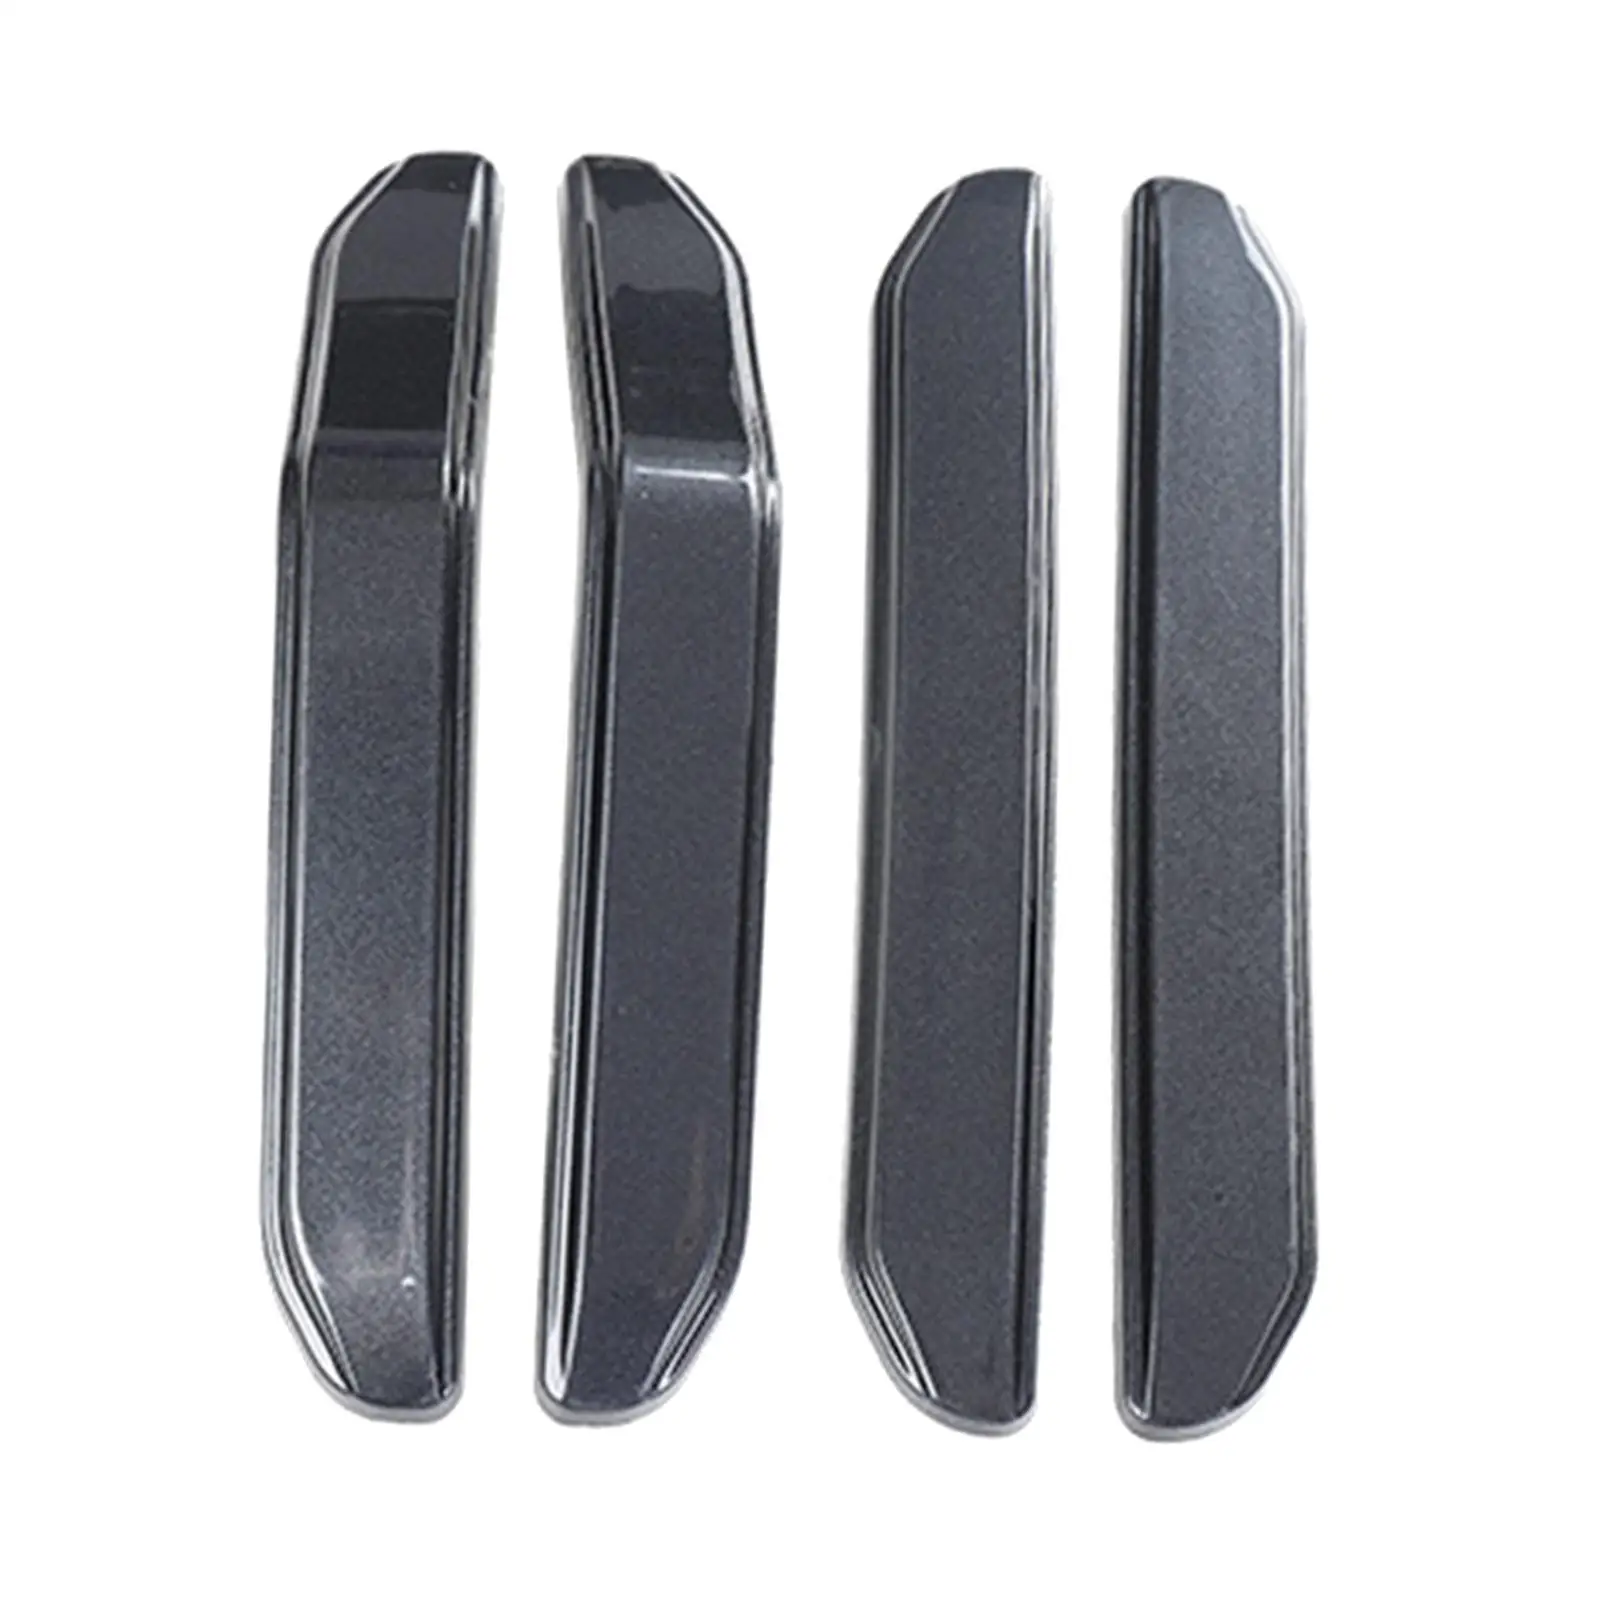 4Pcs Car Door Protector Strip Anti Collision for Sturdy